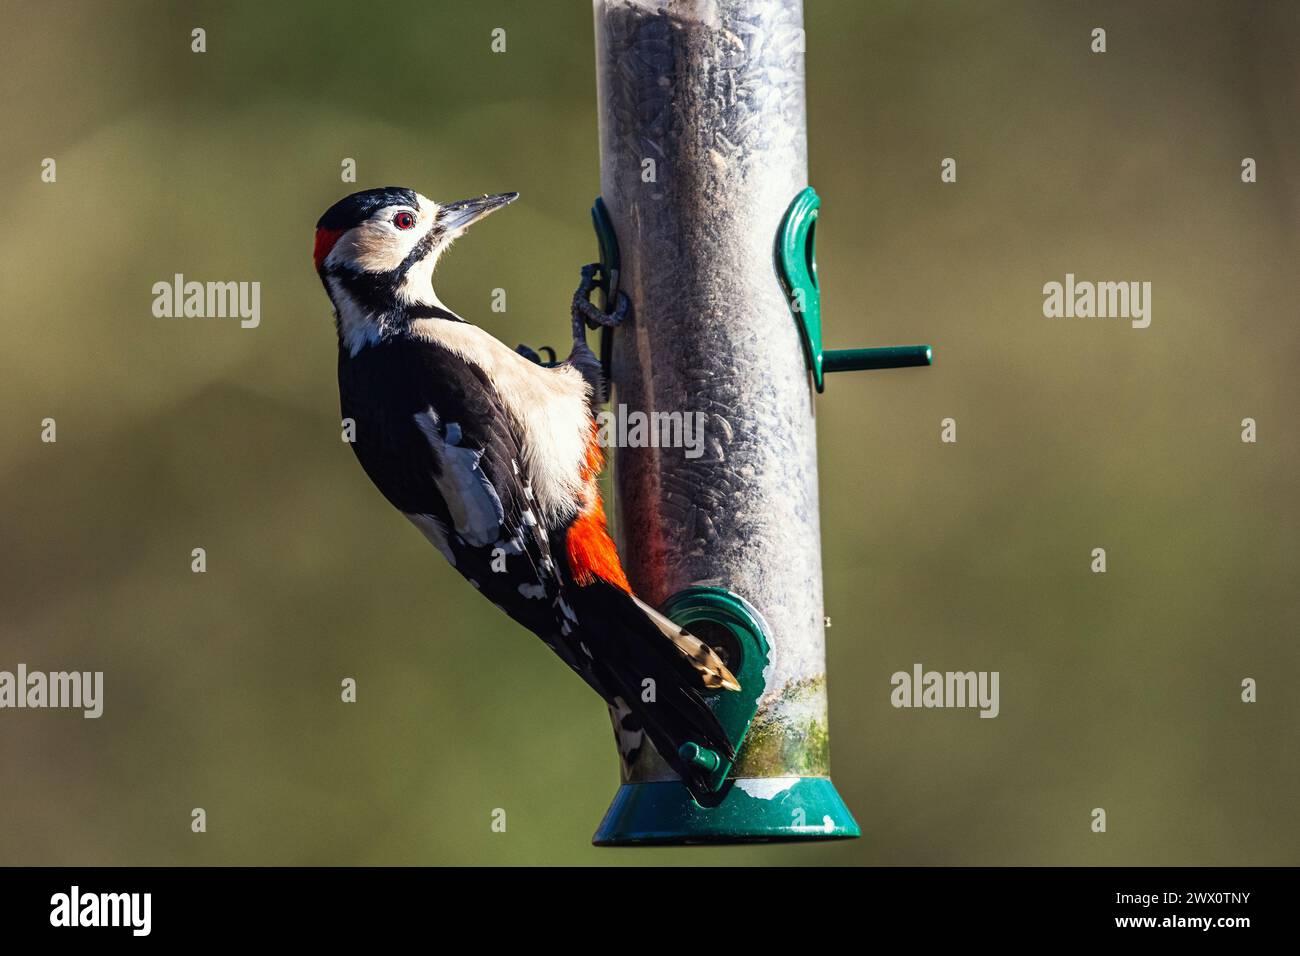 Male of Great Spotted Woodpecker, Dendrocopos major, bird on the feeder in forest at winter Stock Photo